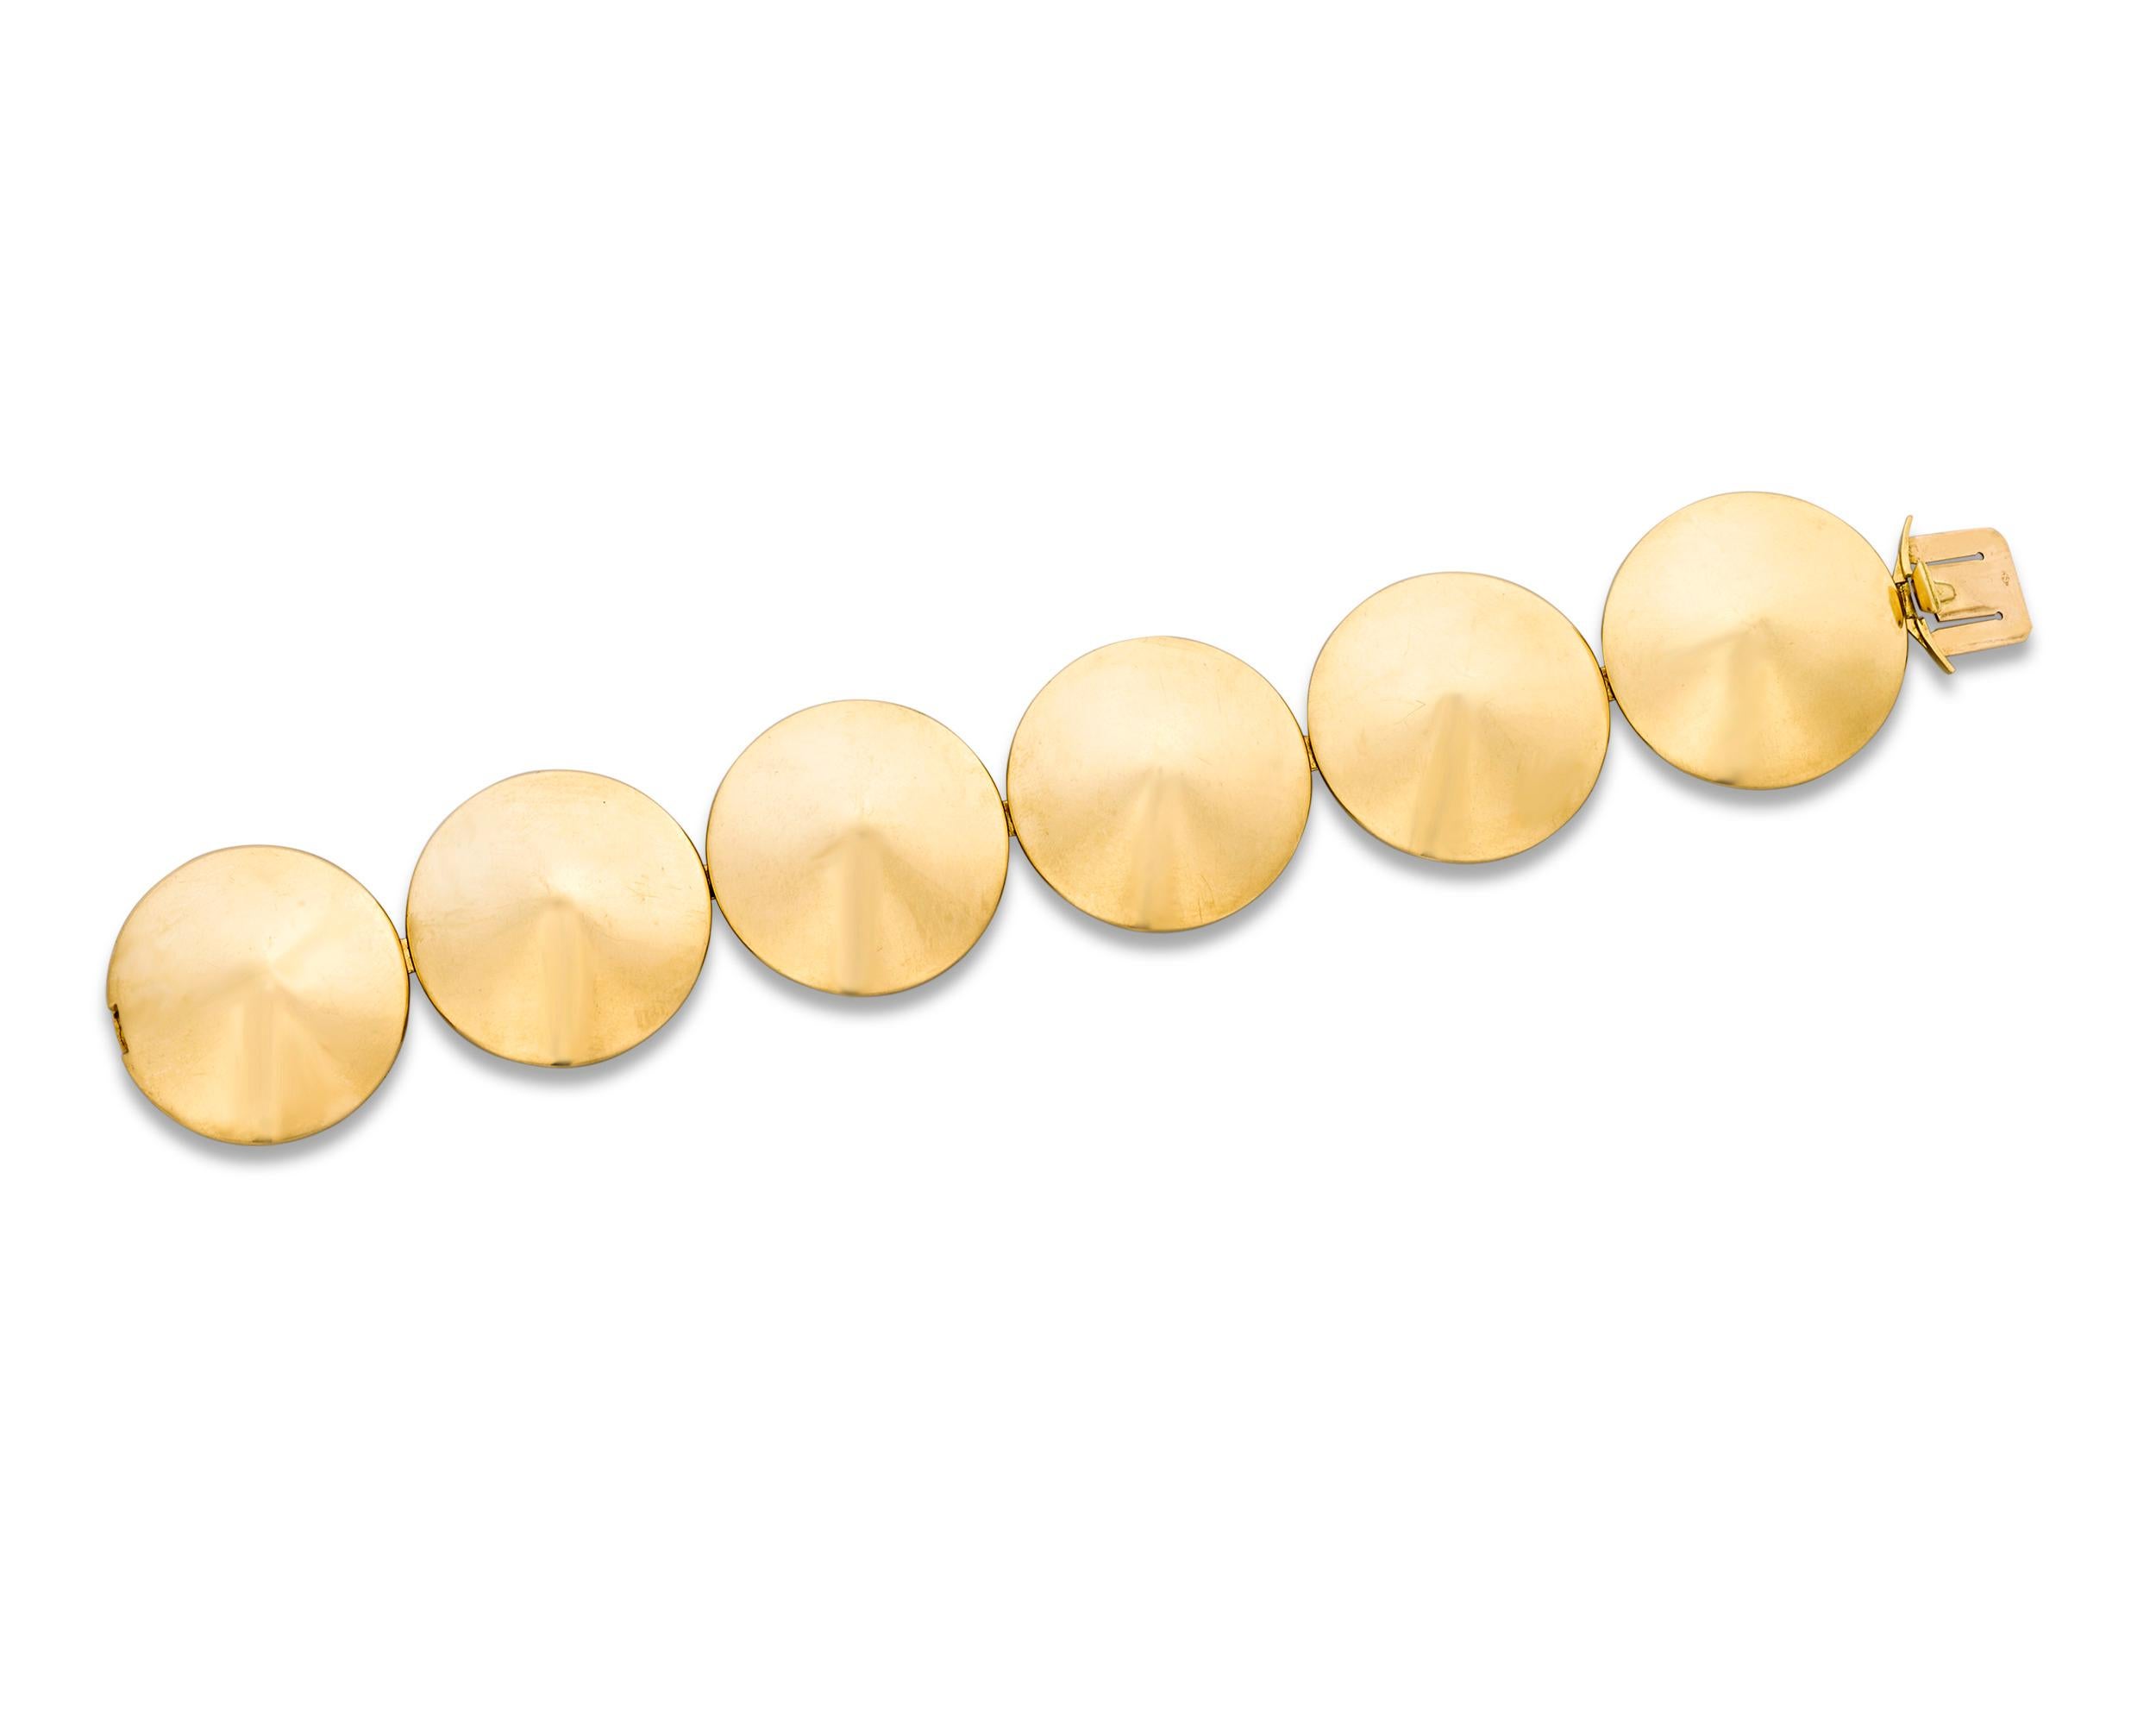 This chic Chapeau Chinois gold link bracelet by Van Cleef & Arpels is a tour-de-force of French jewelry design. Characterized by eye-catching design and grand proportions, the bracelet is composed of large, conical 18K yellow gold discs, providing a